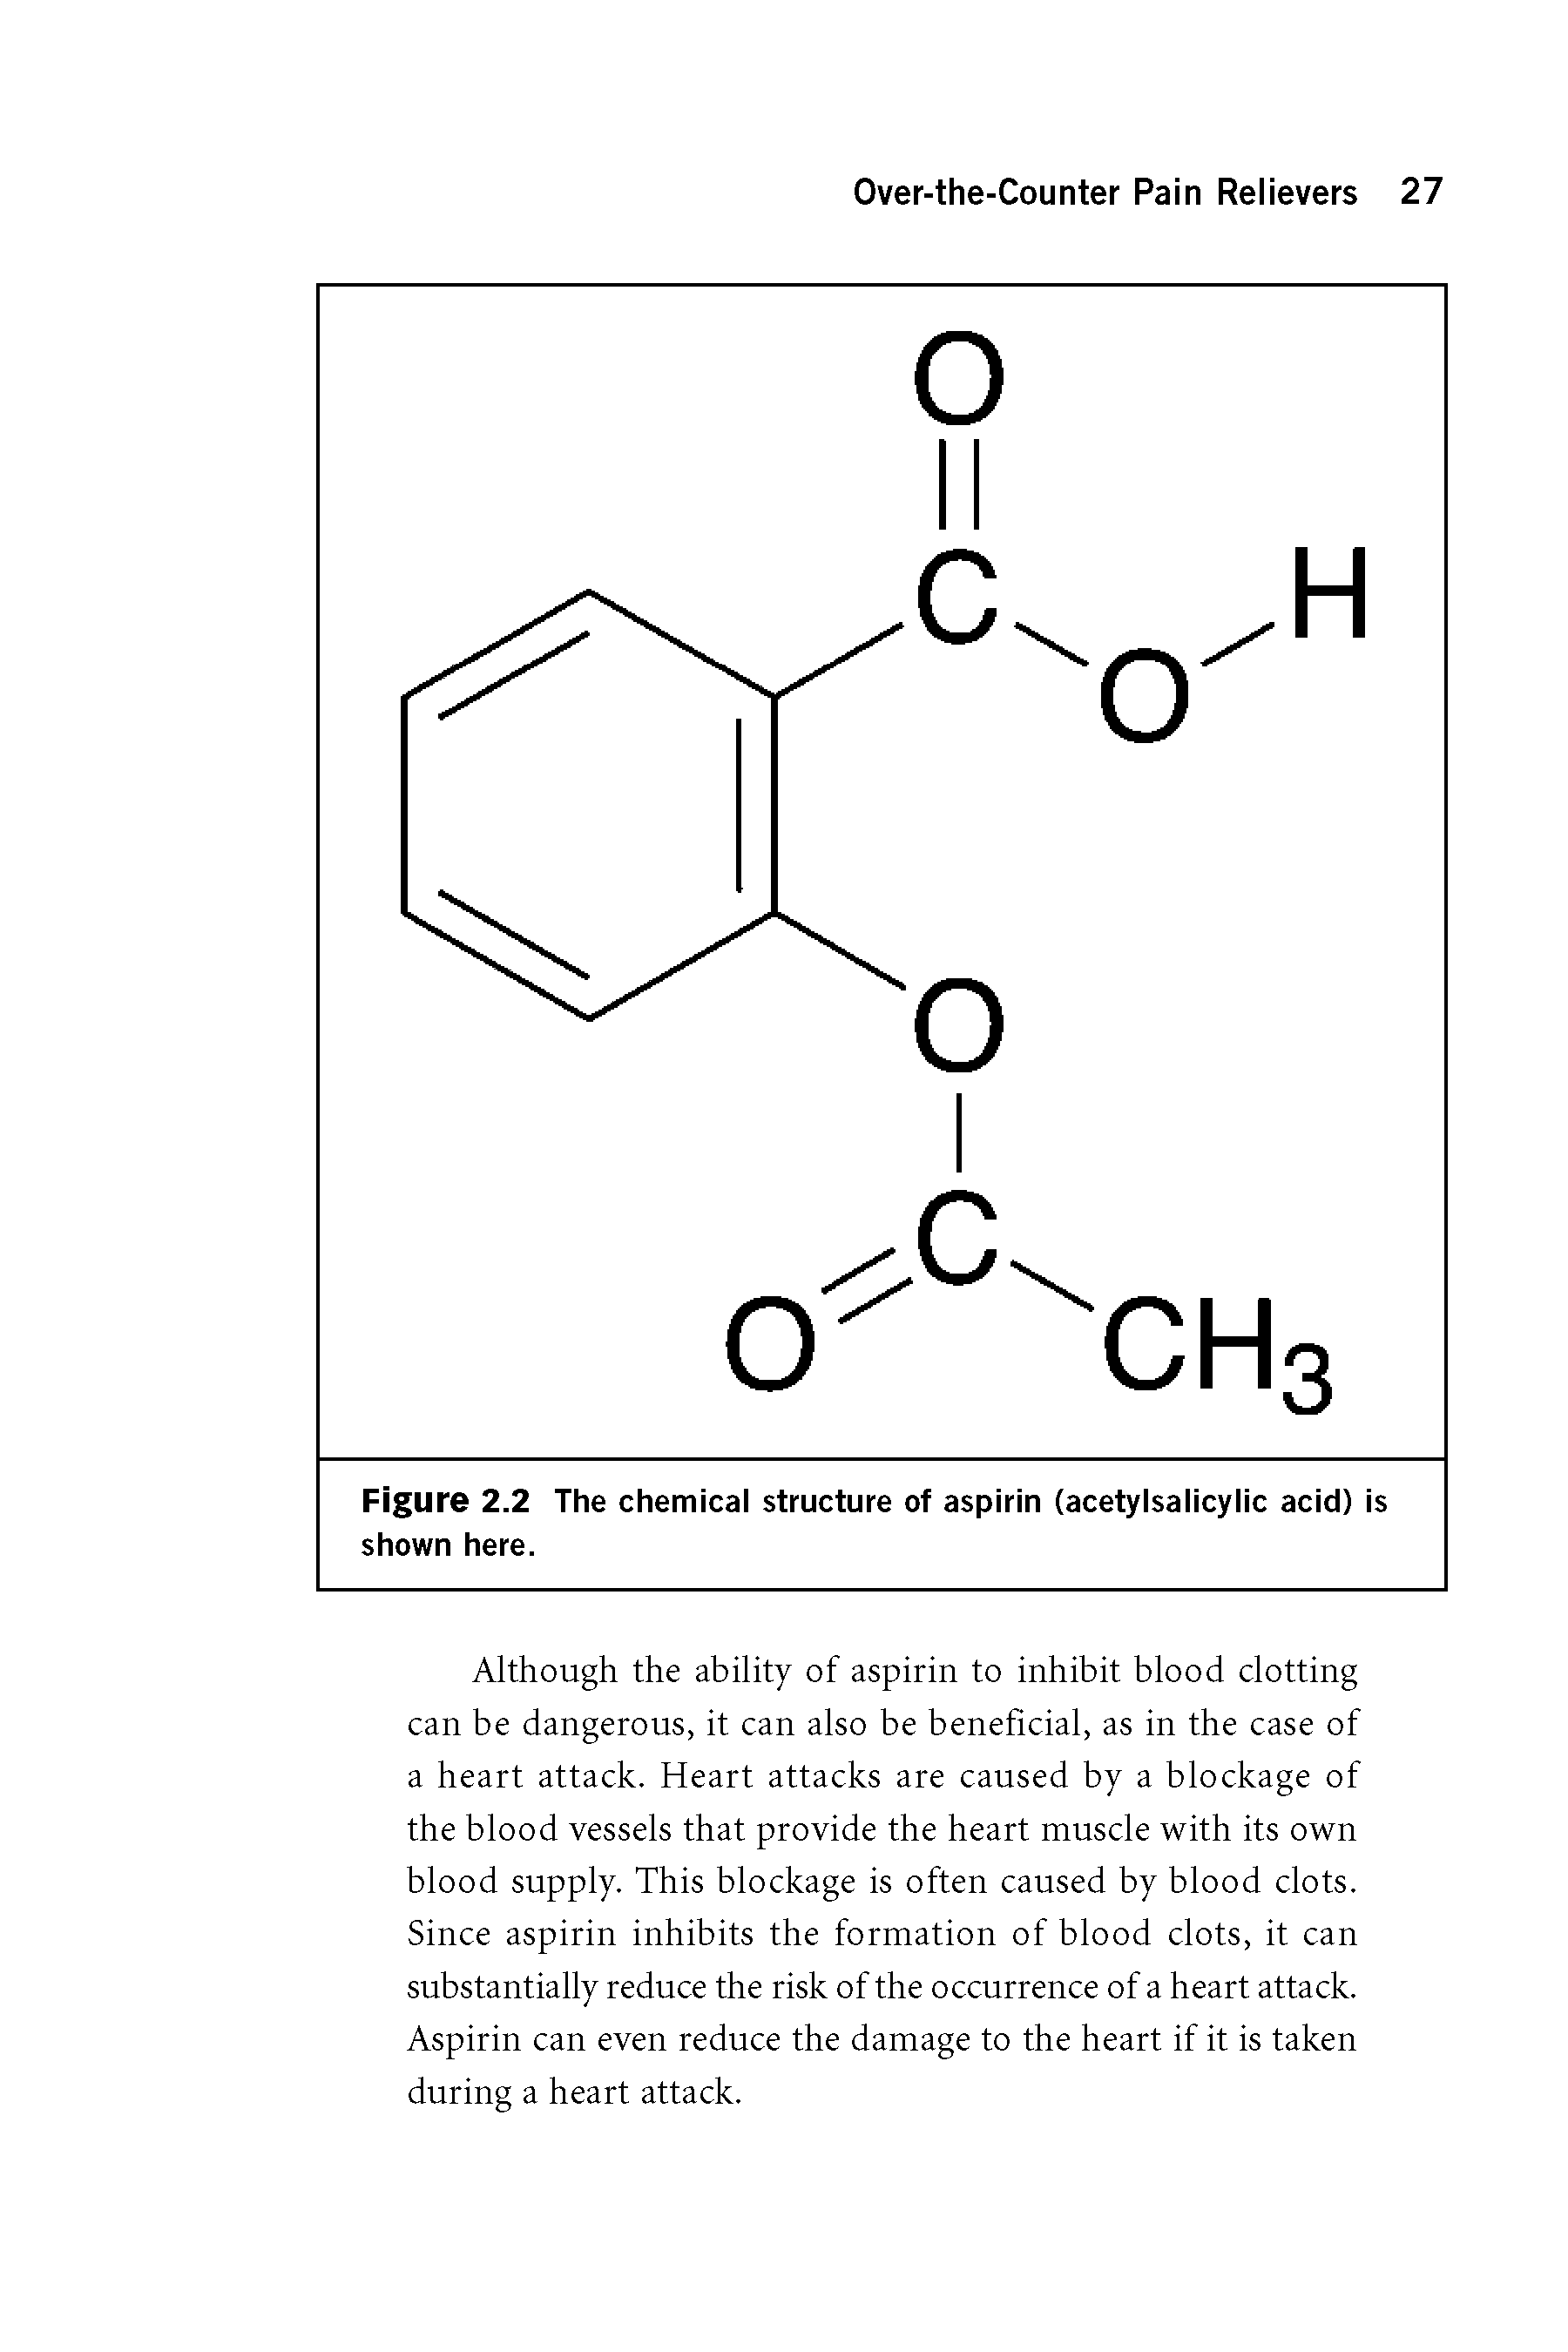 Figure 2.2 The chemical structure of aspirin (acetylsalicylic acid) is shown here.